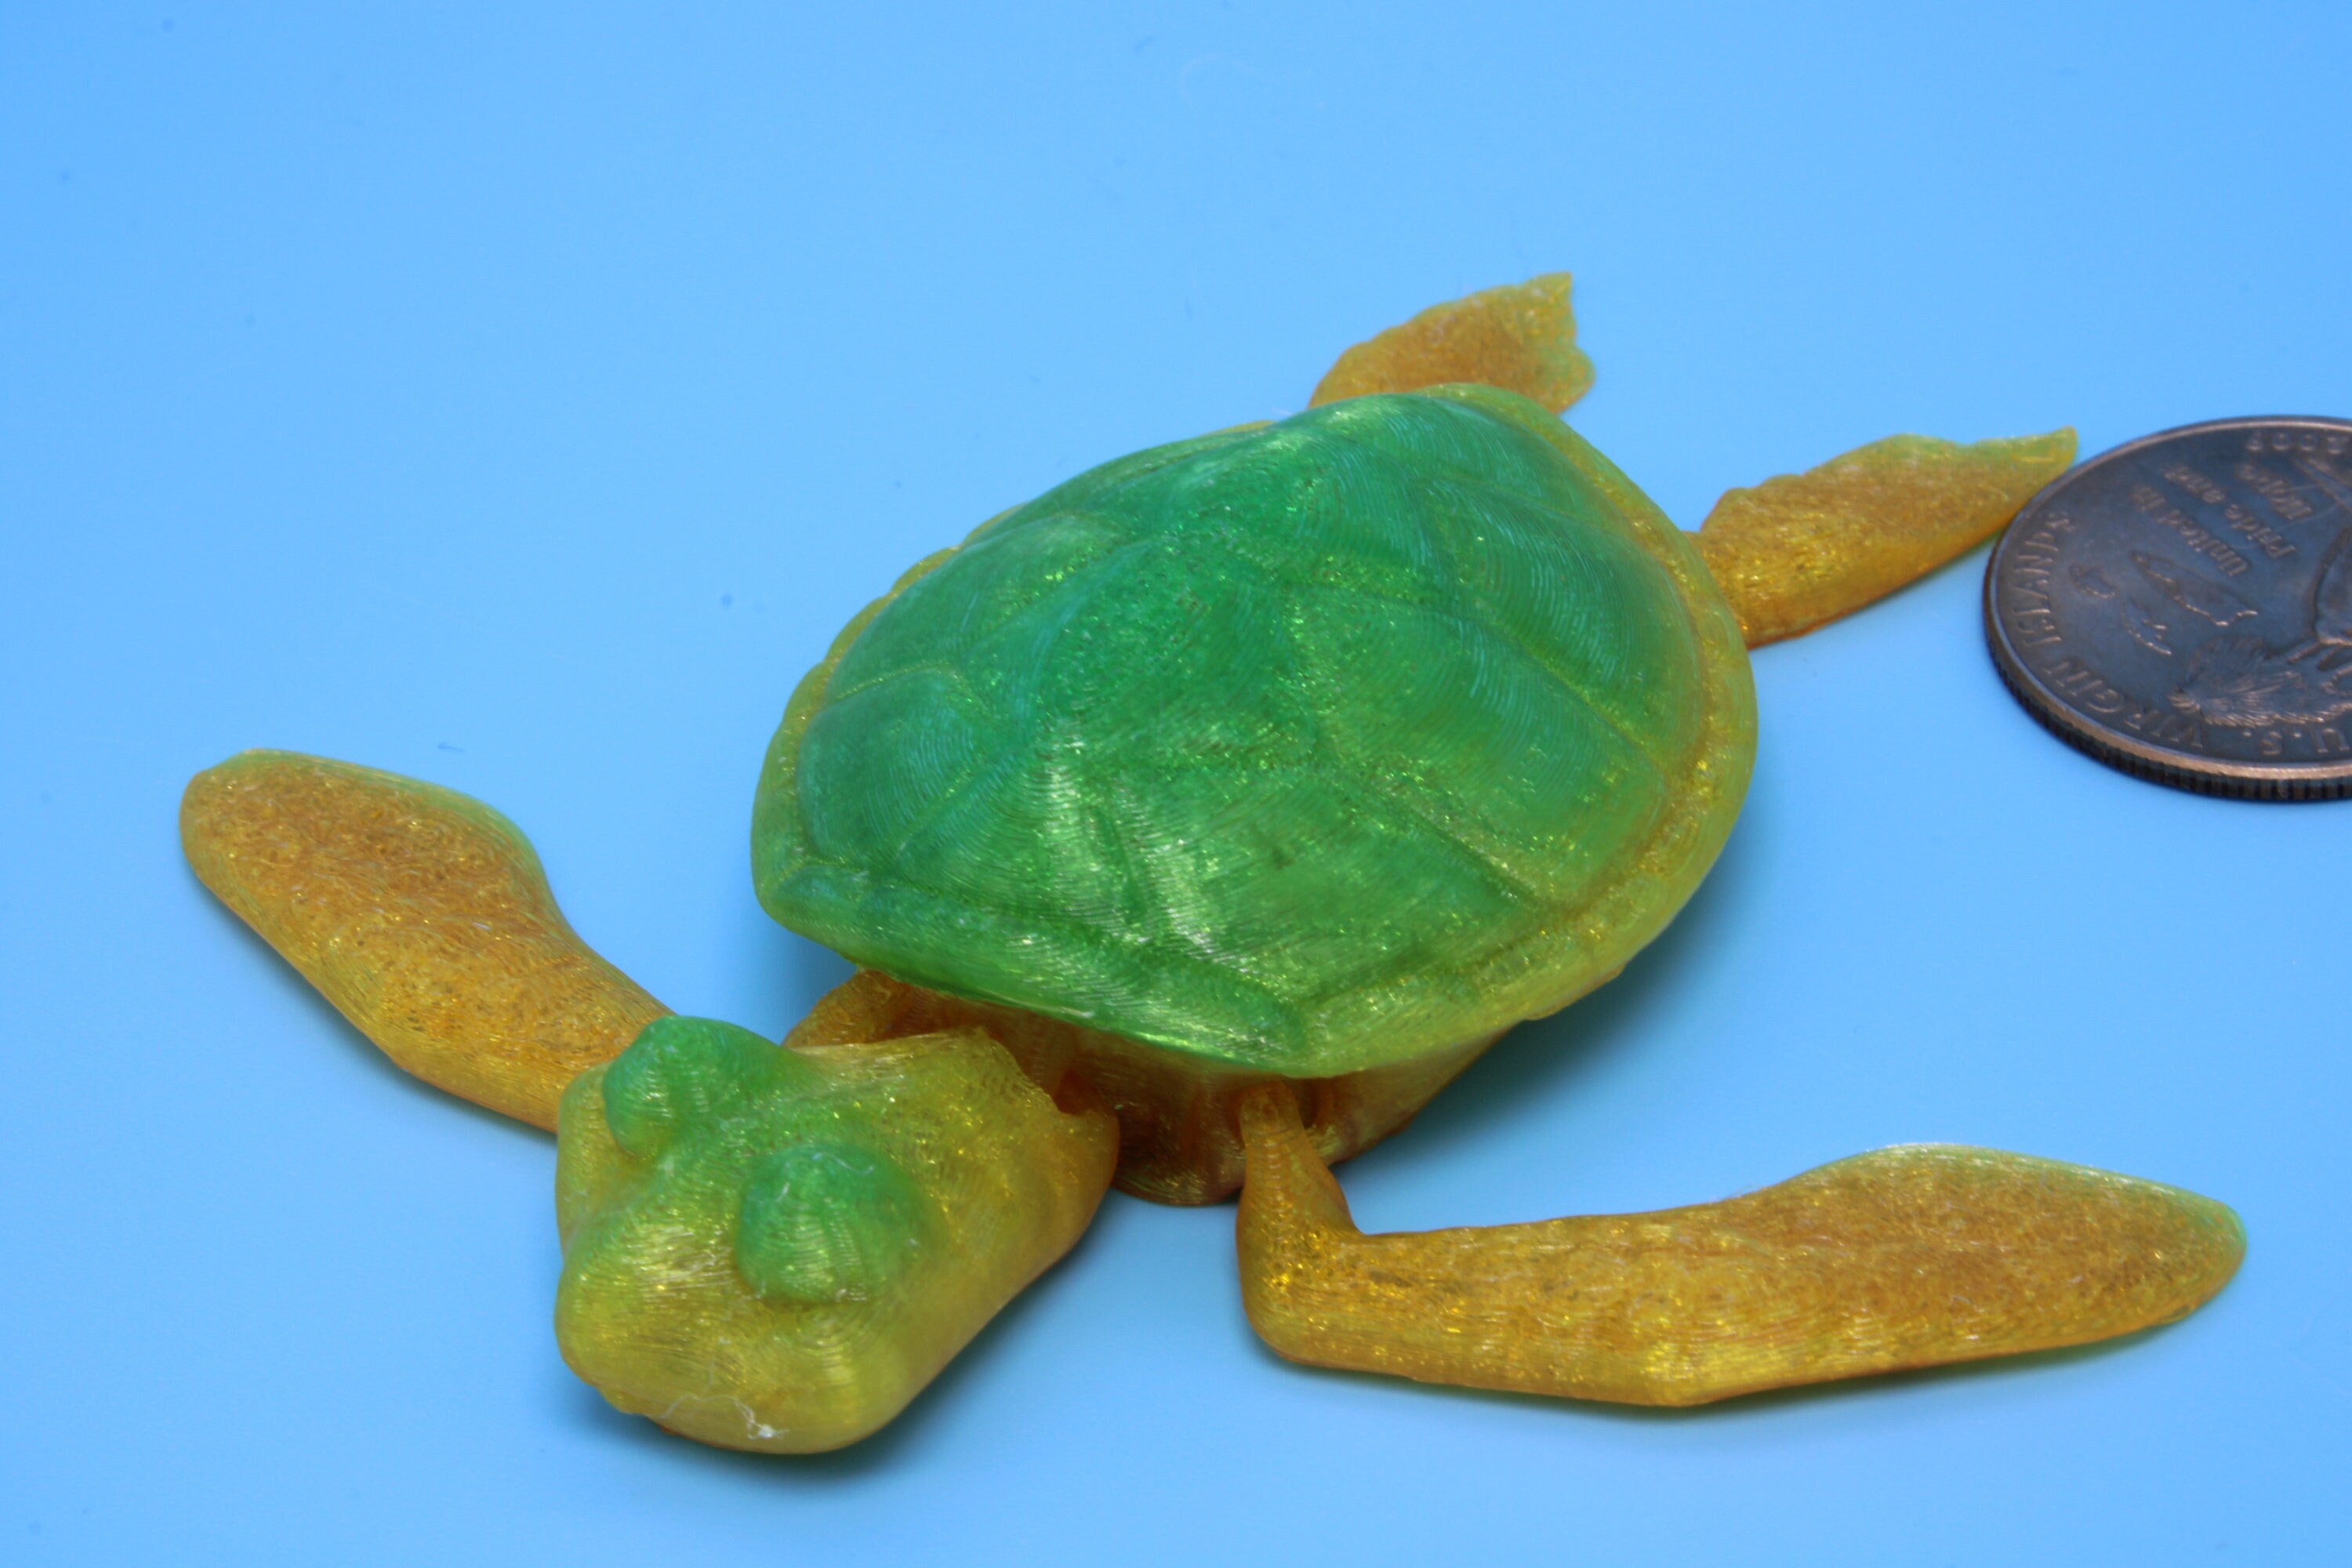 Turtle- Green & Yellow | Miniature | Cute Flexi Toy | Articulating Turtle | 3D printed 3 in.